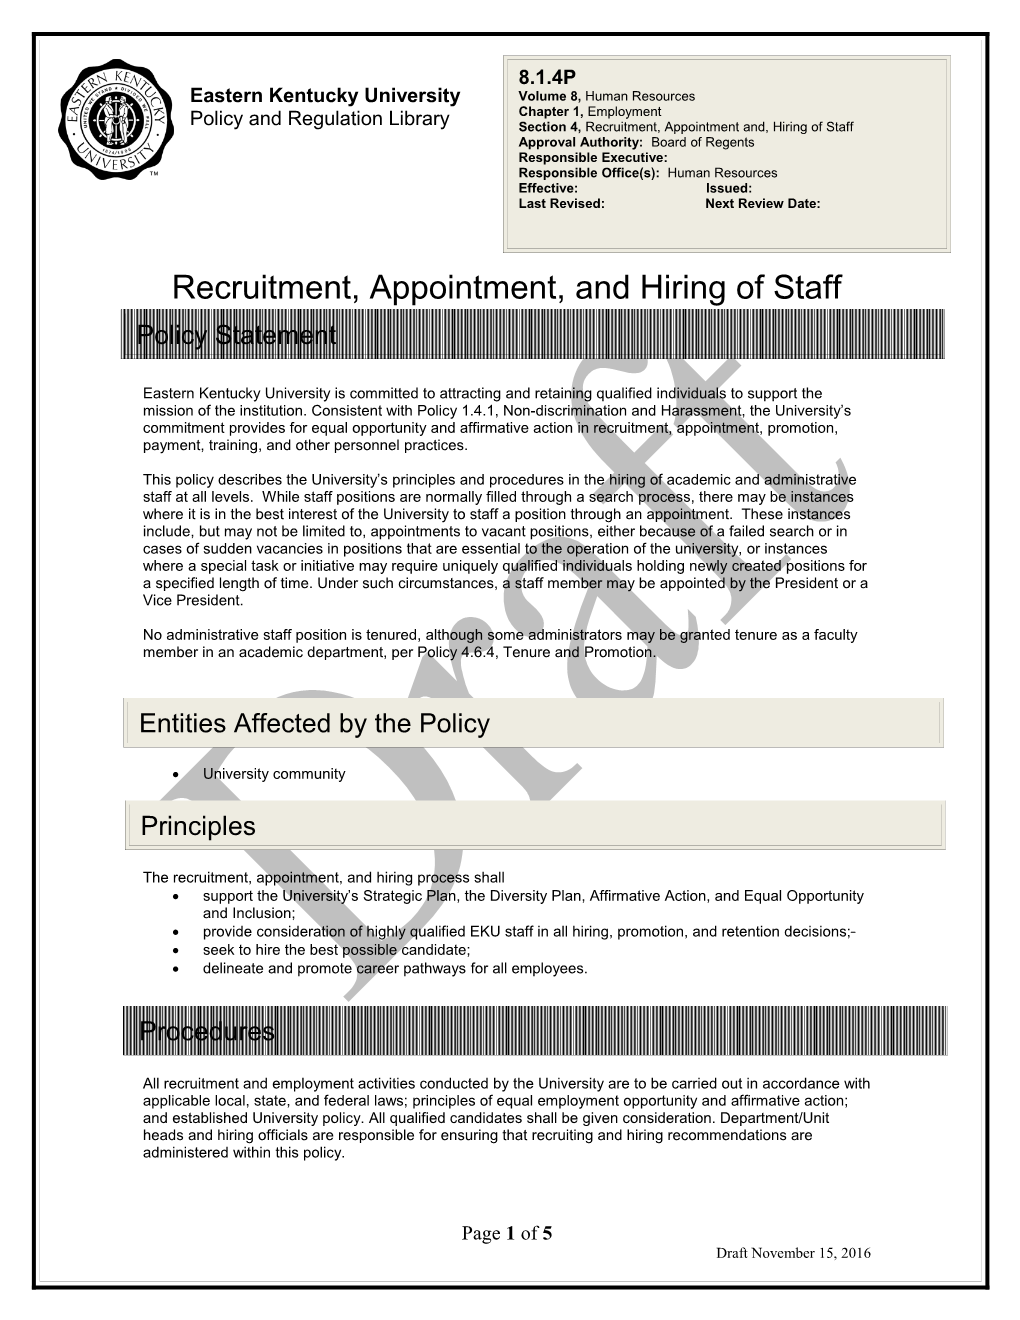 Section 4, Recruitment, Appointment, and Hiring of Staff